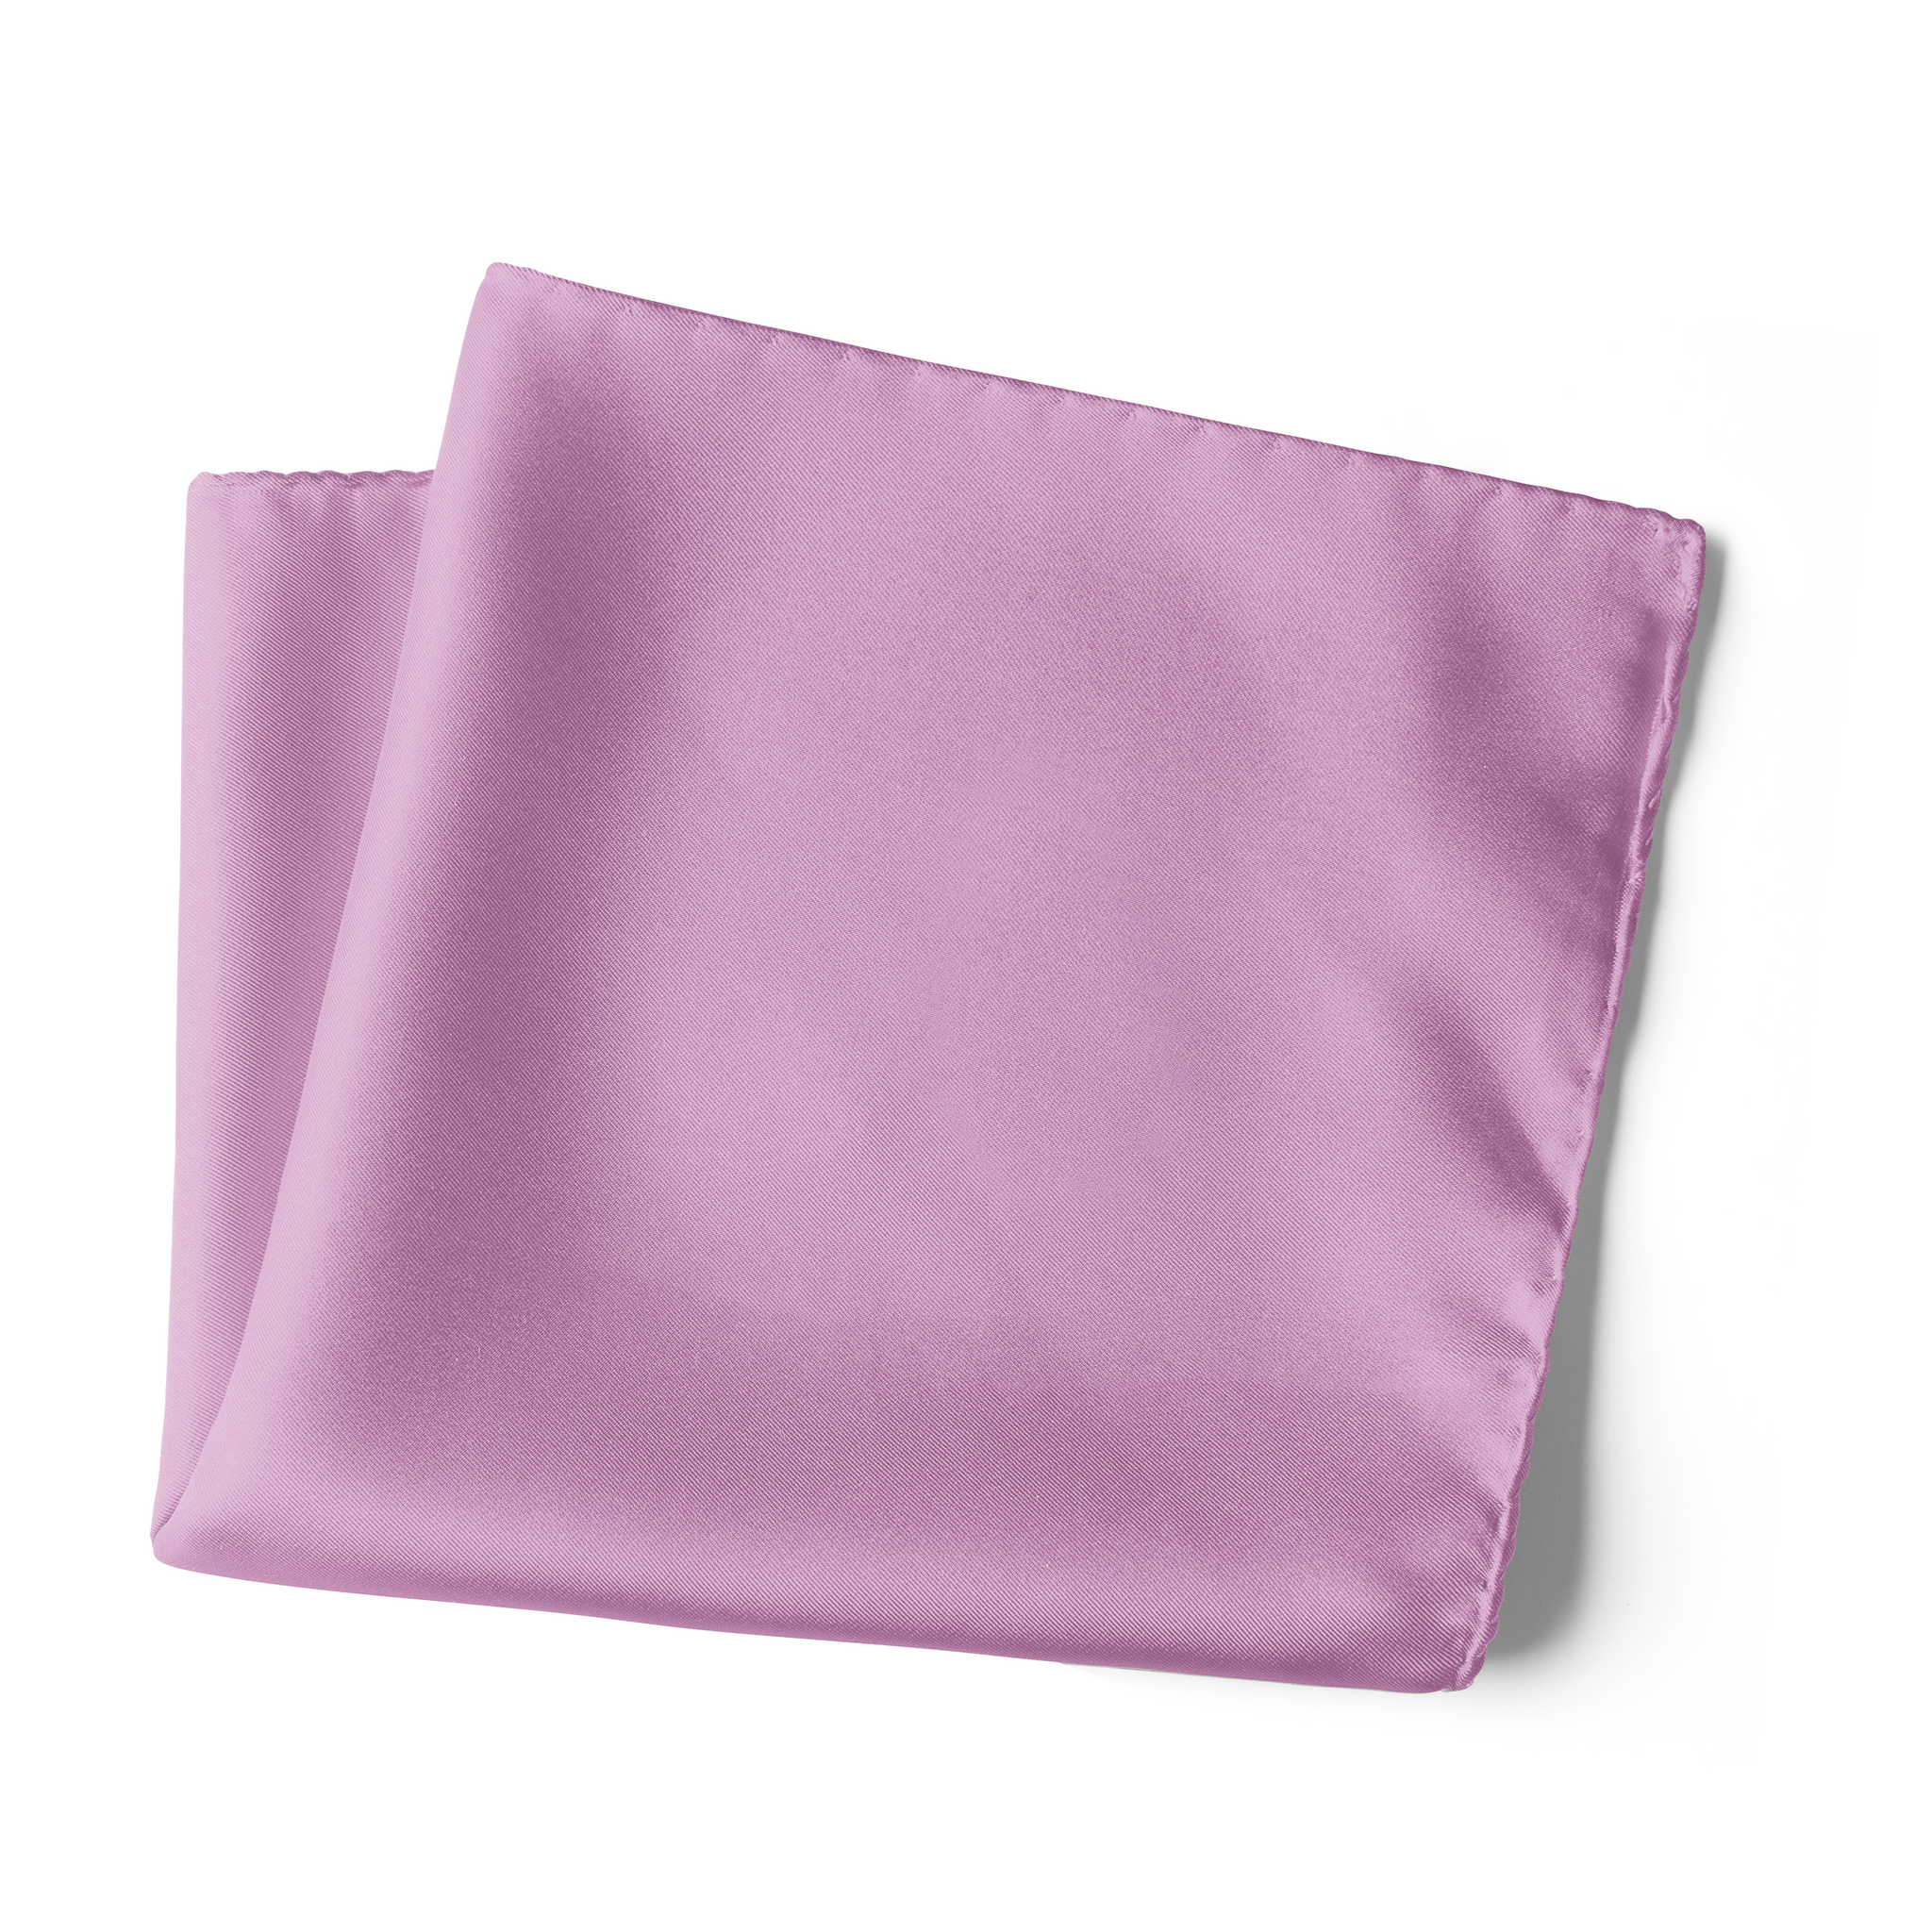 Chokore Violet Pure Silk Pocket Square, from the Solids Line